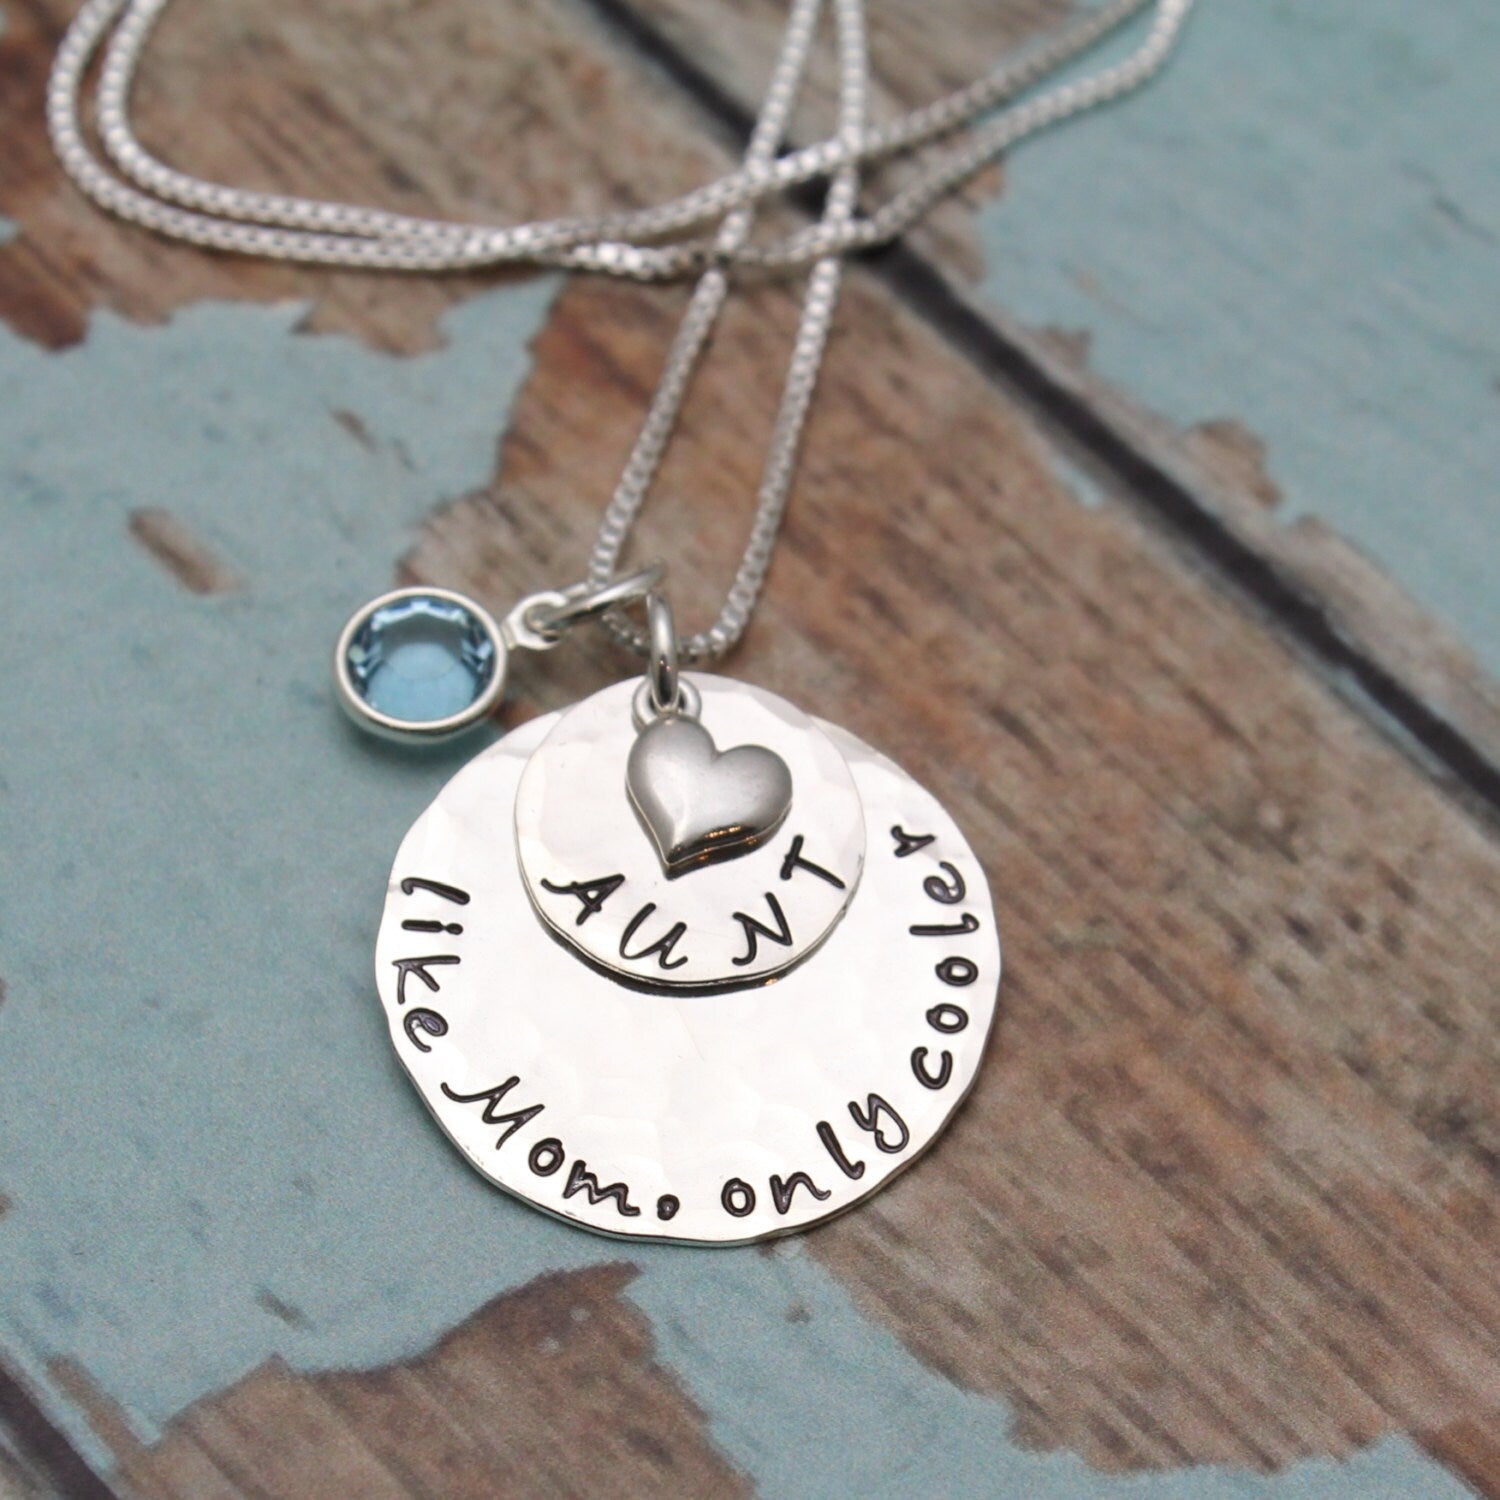 AUNT Necklace Aunt, Like Mom Only Cooler Necklace Aunt Gift Hand Stamped Personalized Necklace Aunt Gift Auntie Jewelry